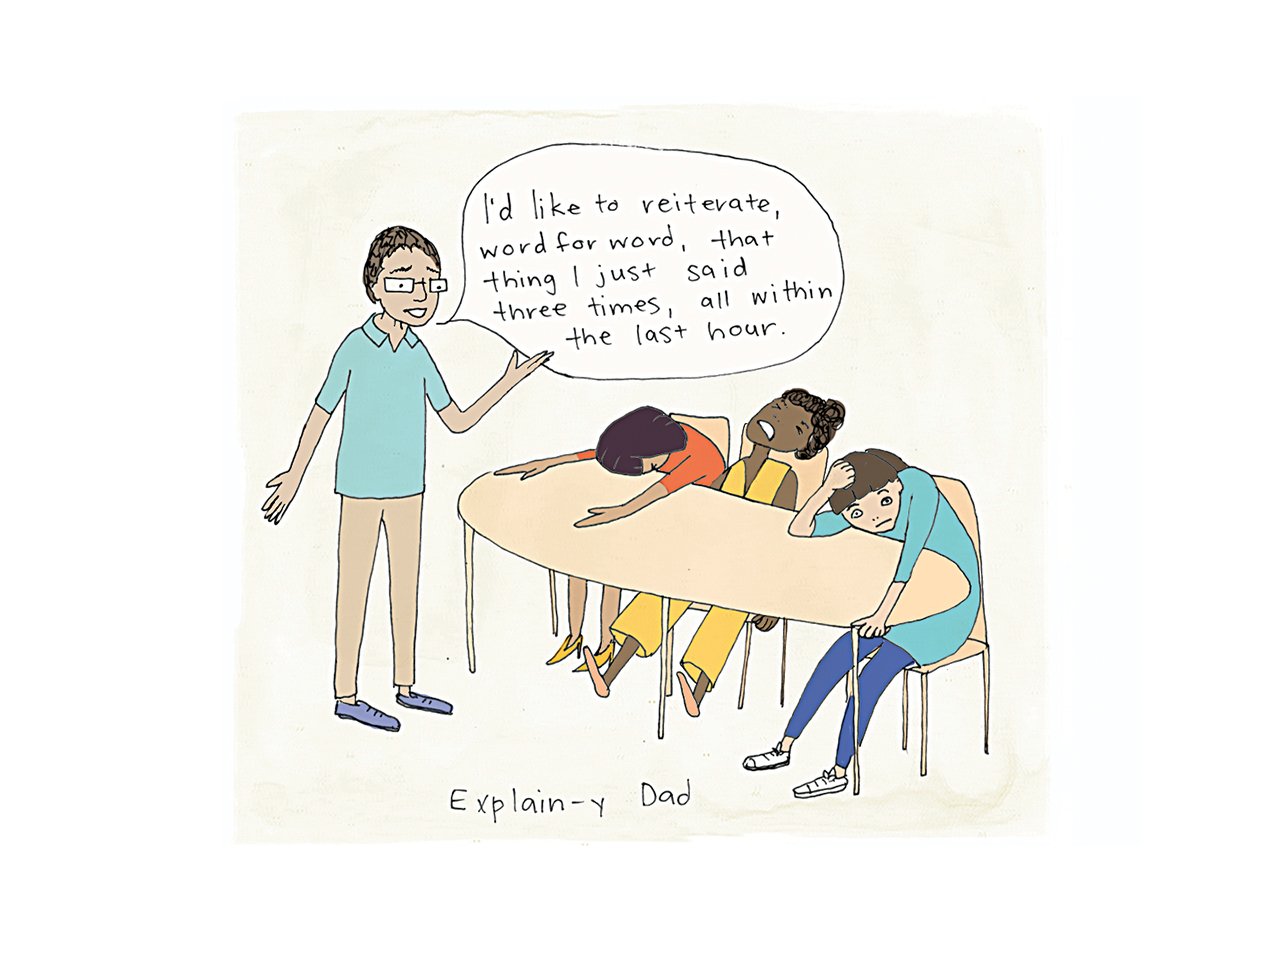 Illustration of the Explain-y dad explaining something to an audience of parents who look bored and frustrated